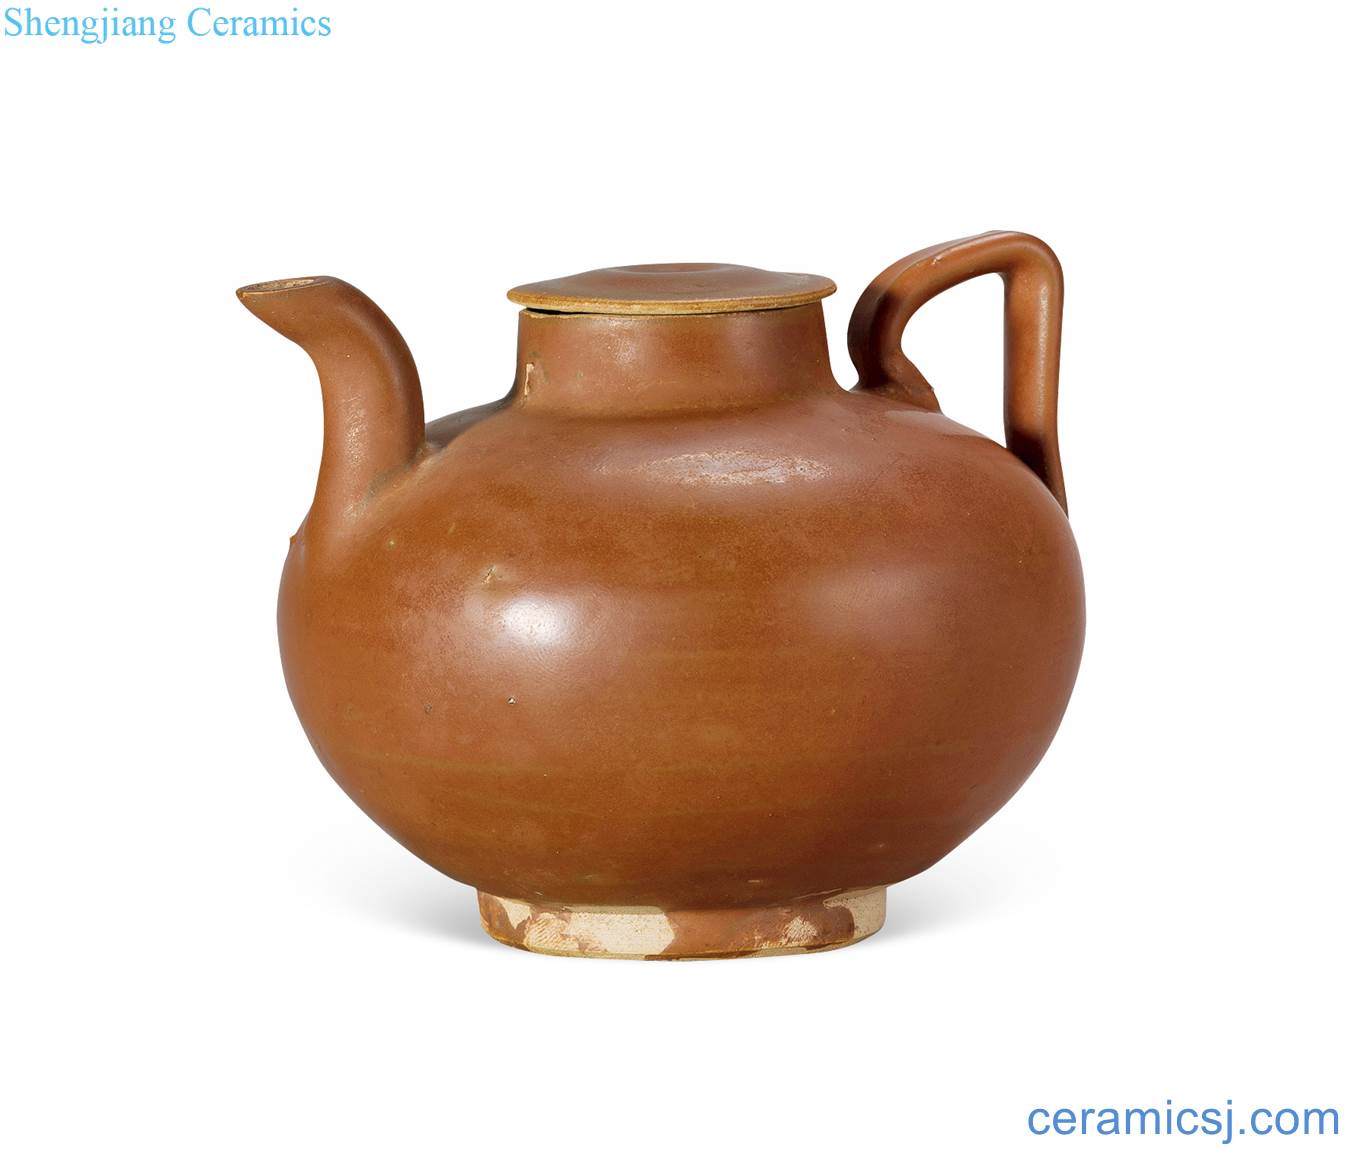 Northern song dynasty yao state kiln persimmon red glaze ewer